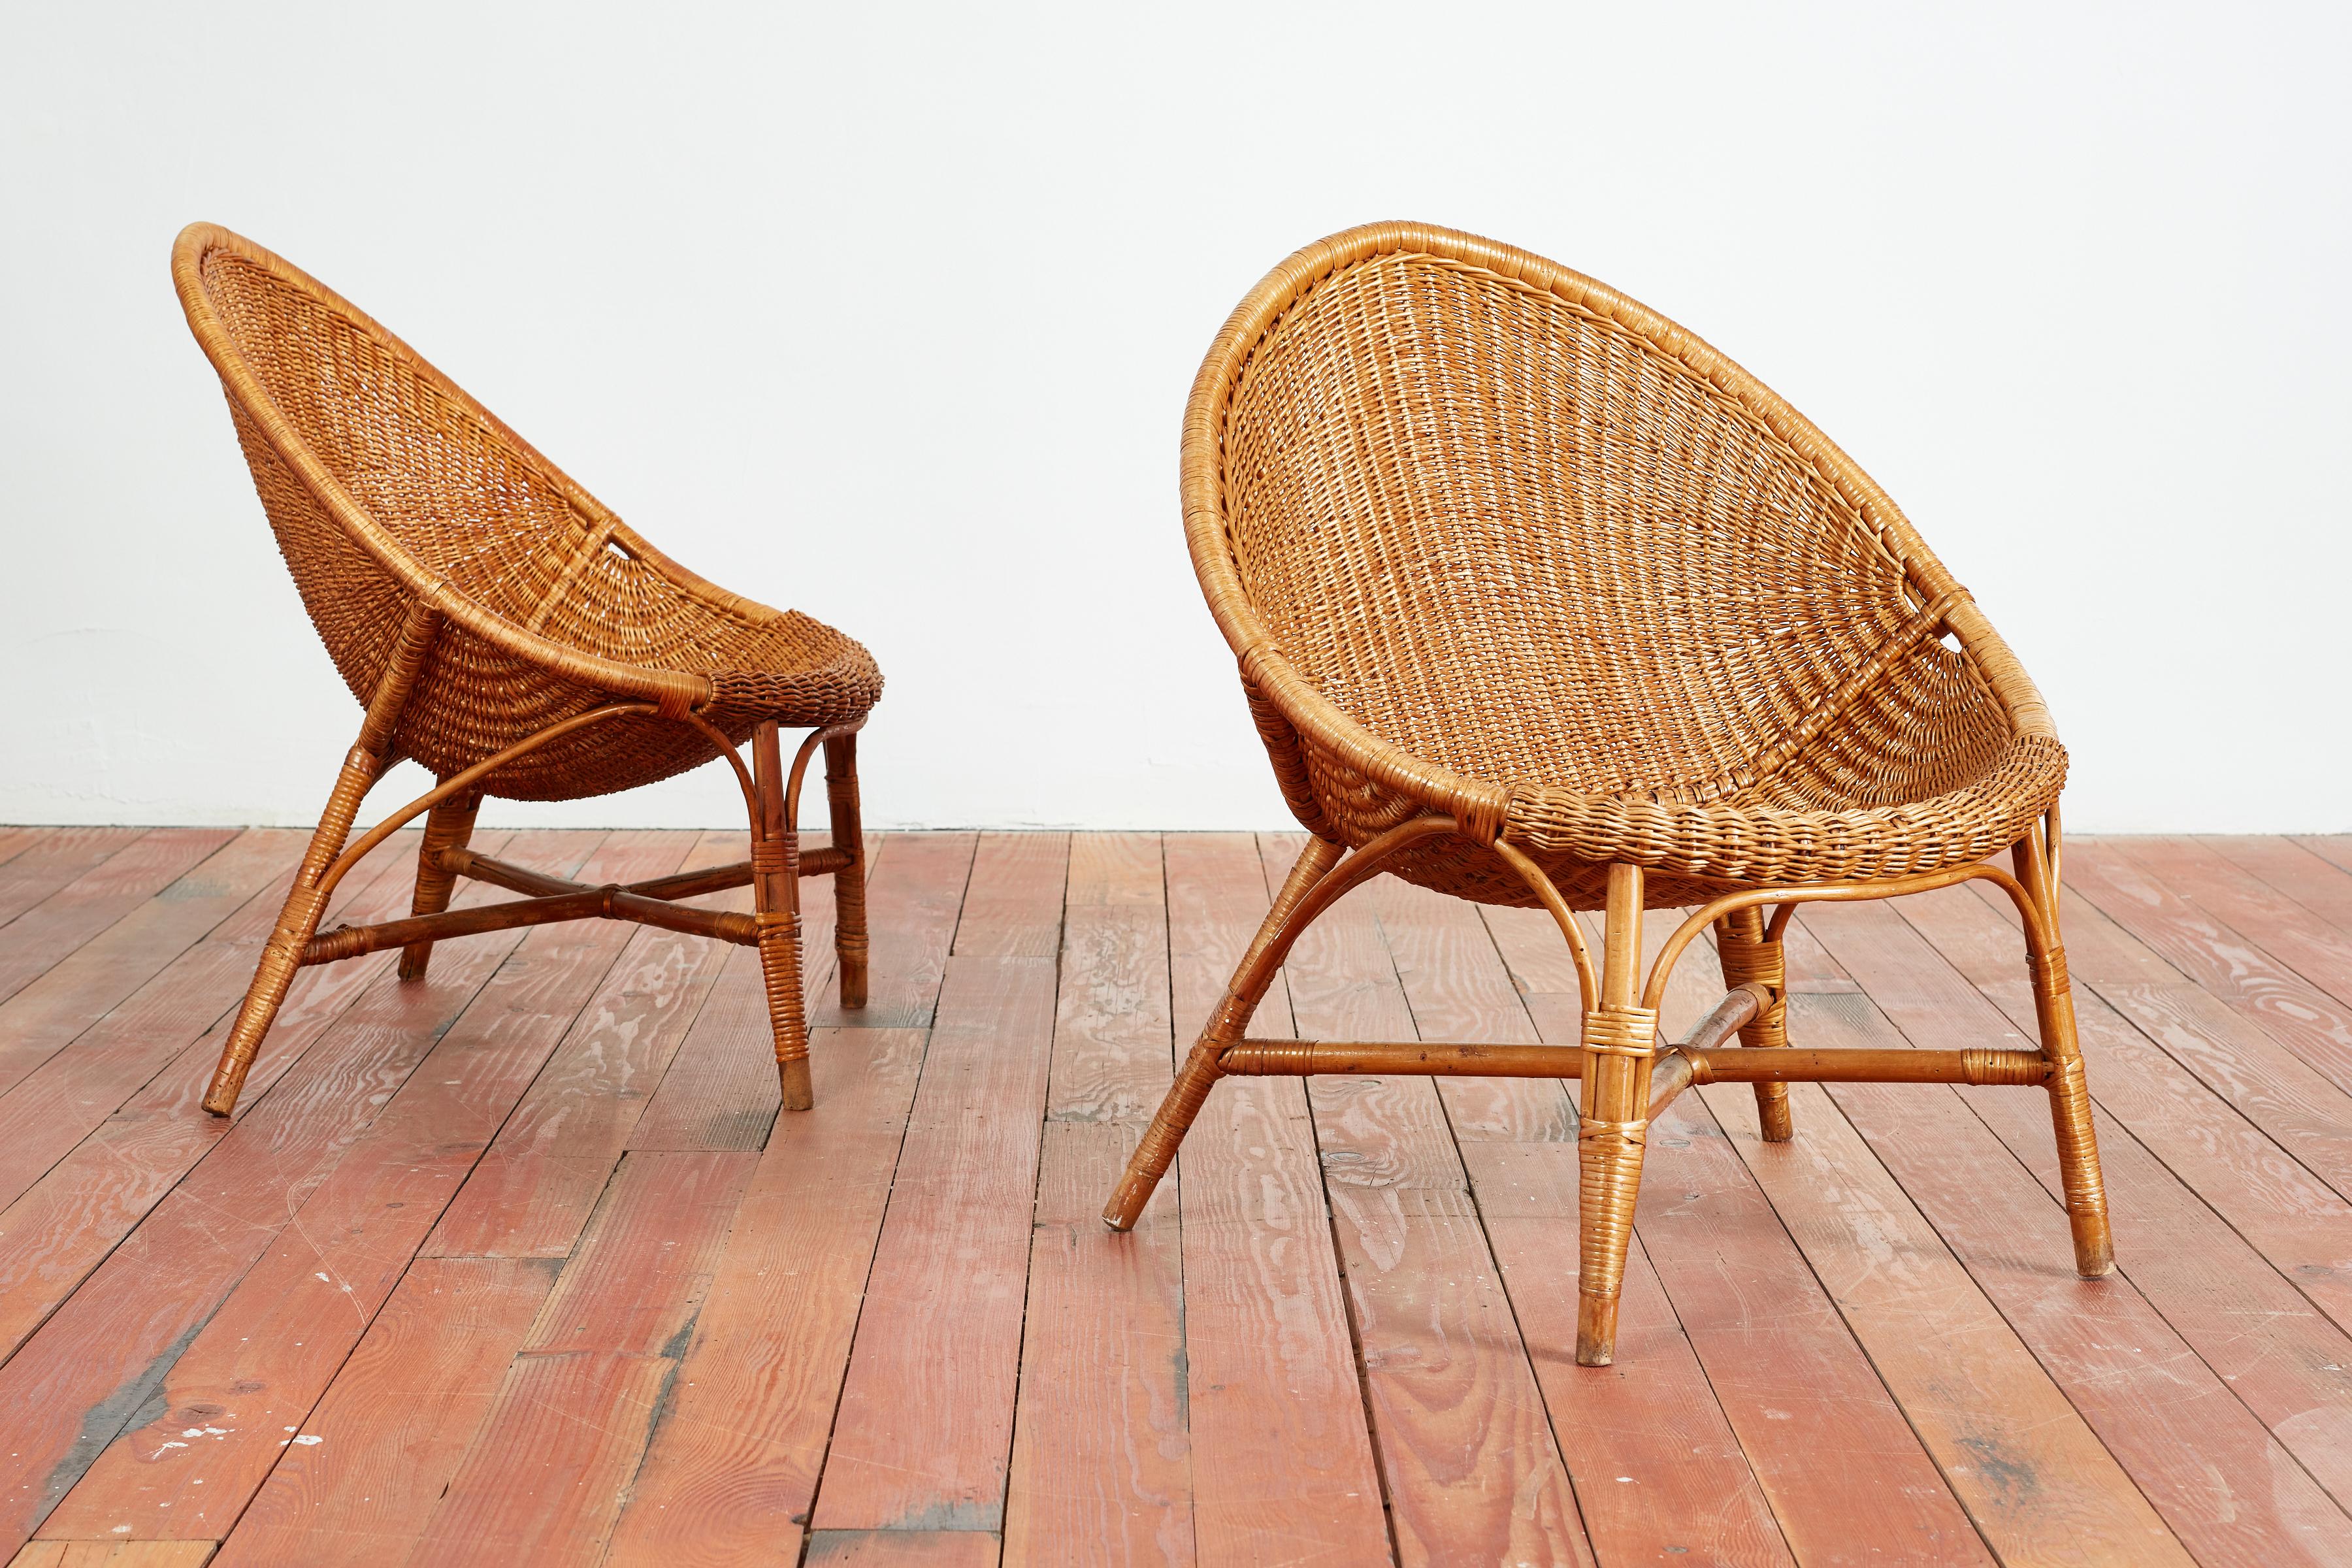 Italian wicker and bamboo bucket chairs with wonderful sculptural shape.
Italy, 1950's 